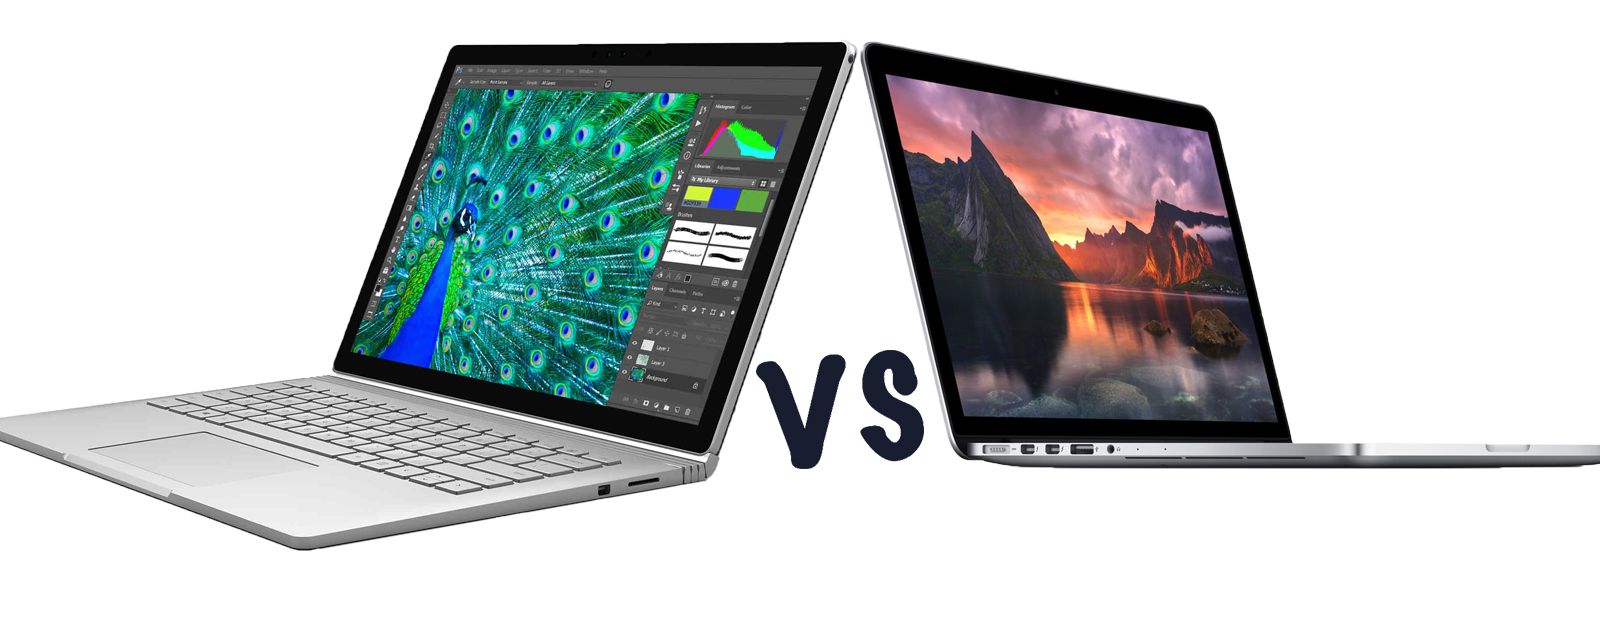 microsoft surface book vs apple macbook pro with retina display what s the difference  image 1